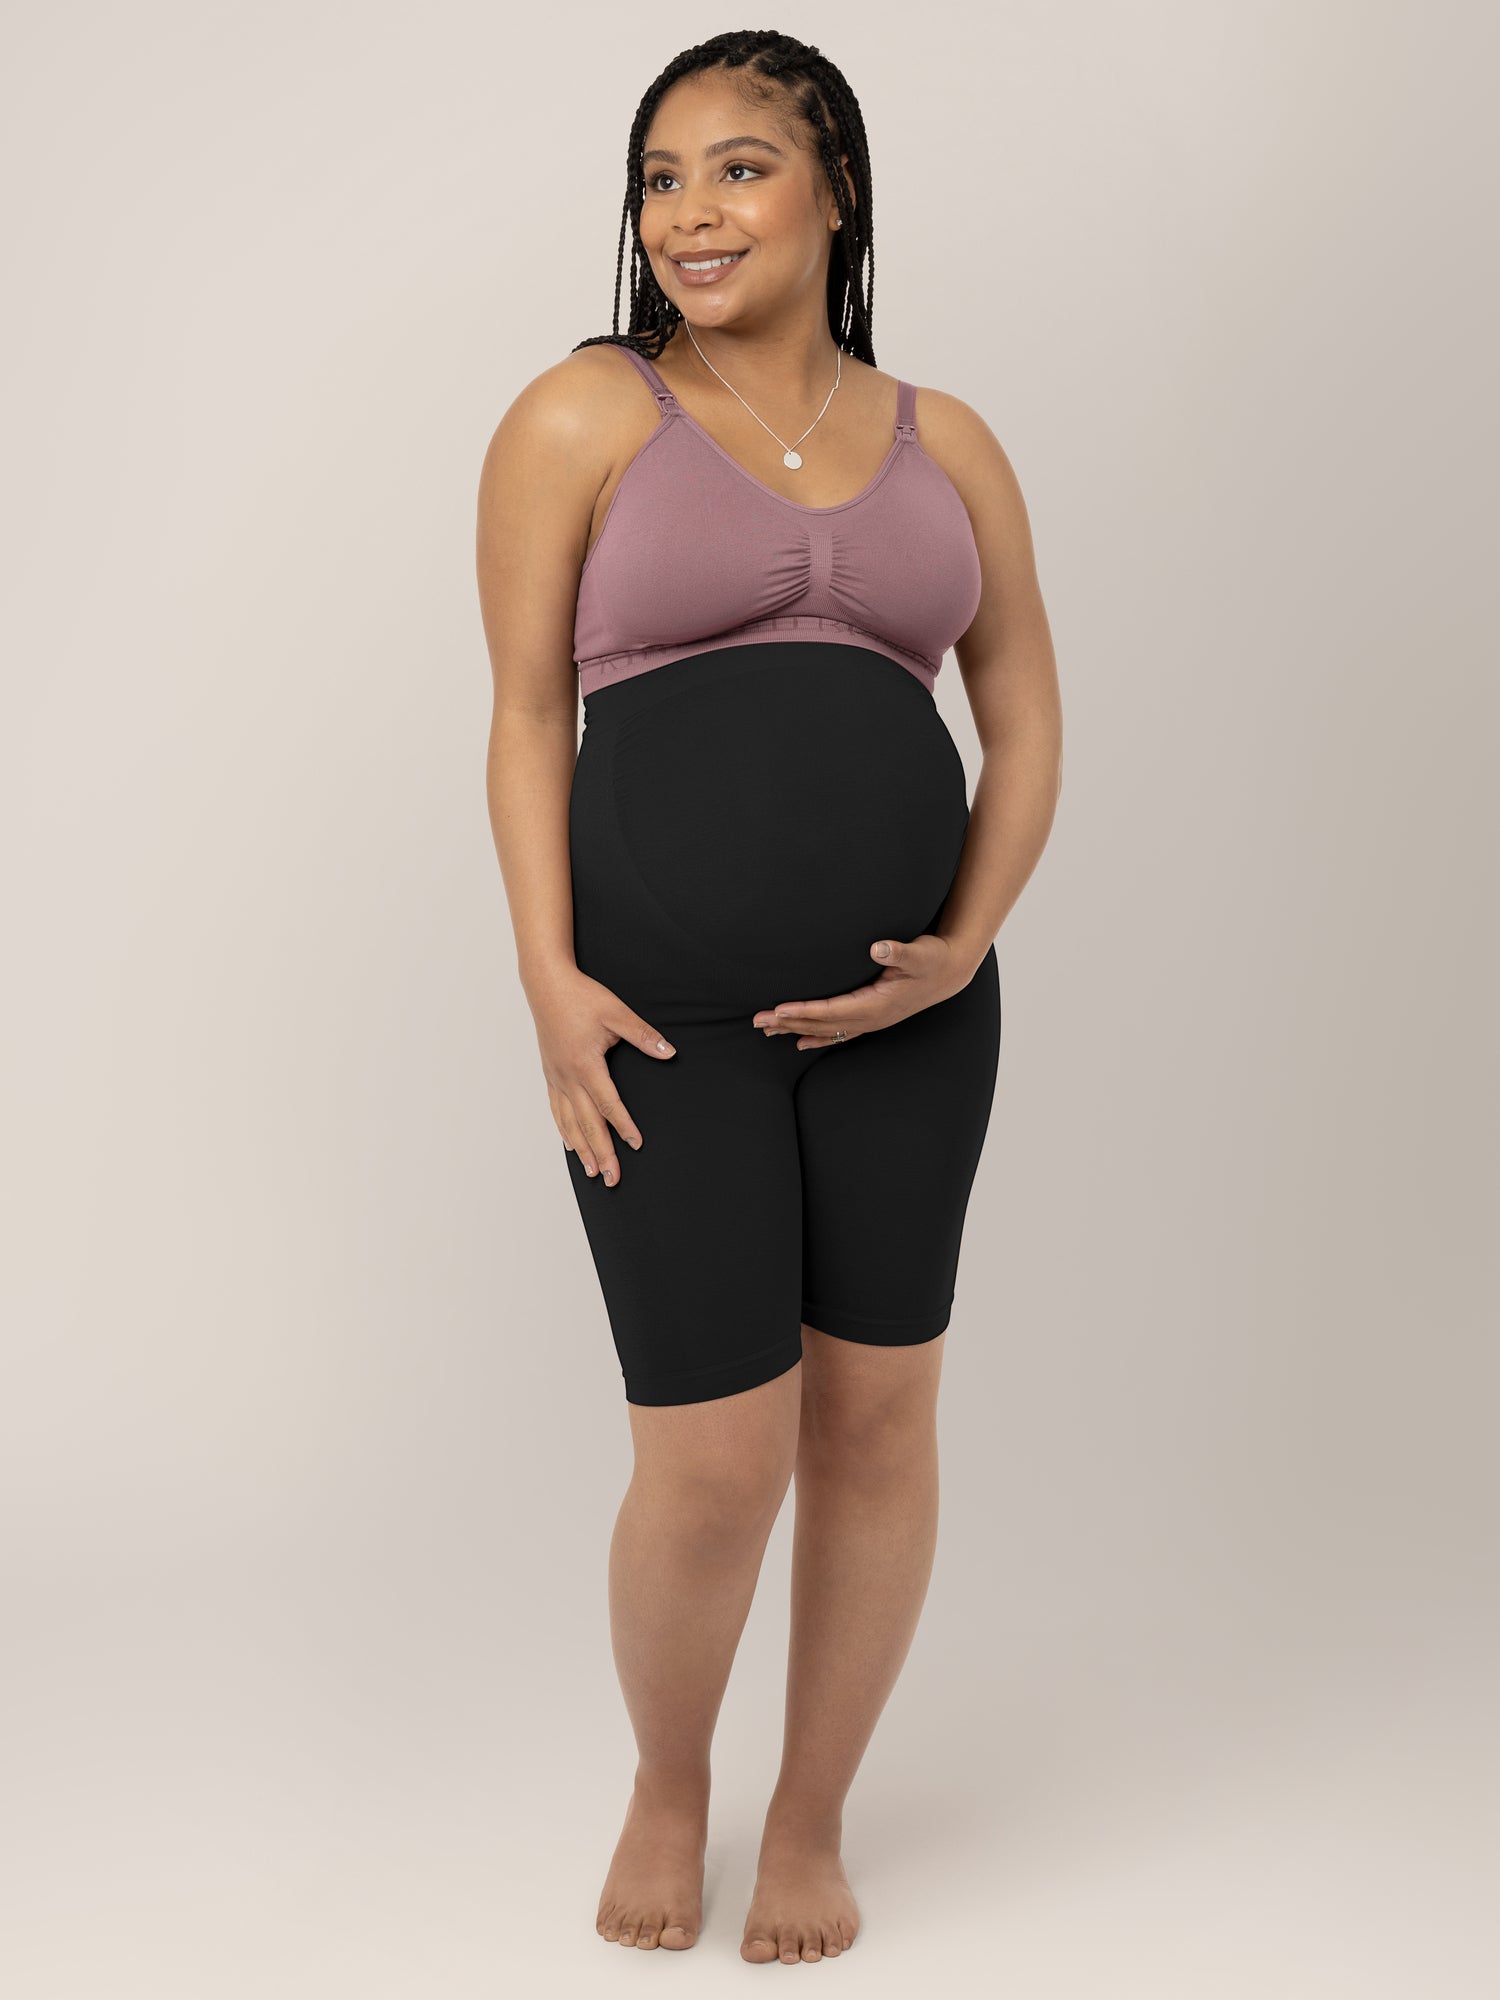 Model holding her belly while wearing the Seamless Bamboo Maternity Thigh Savers in Black